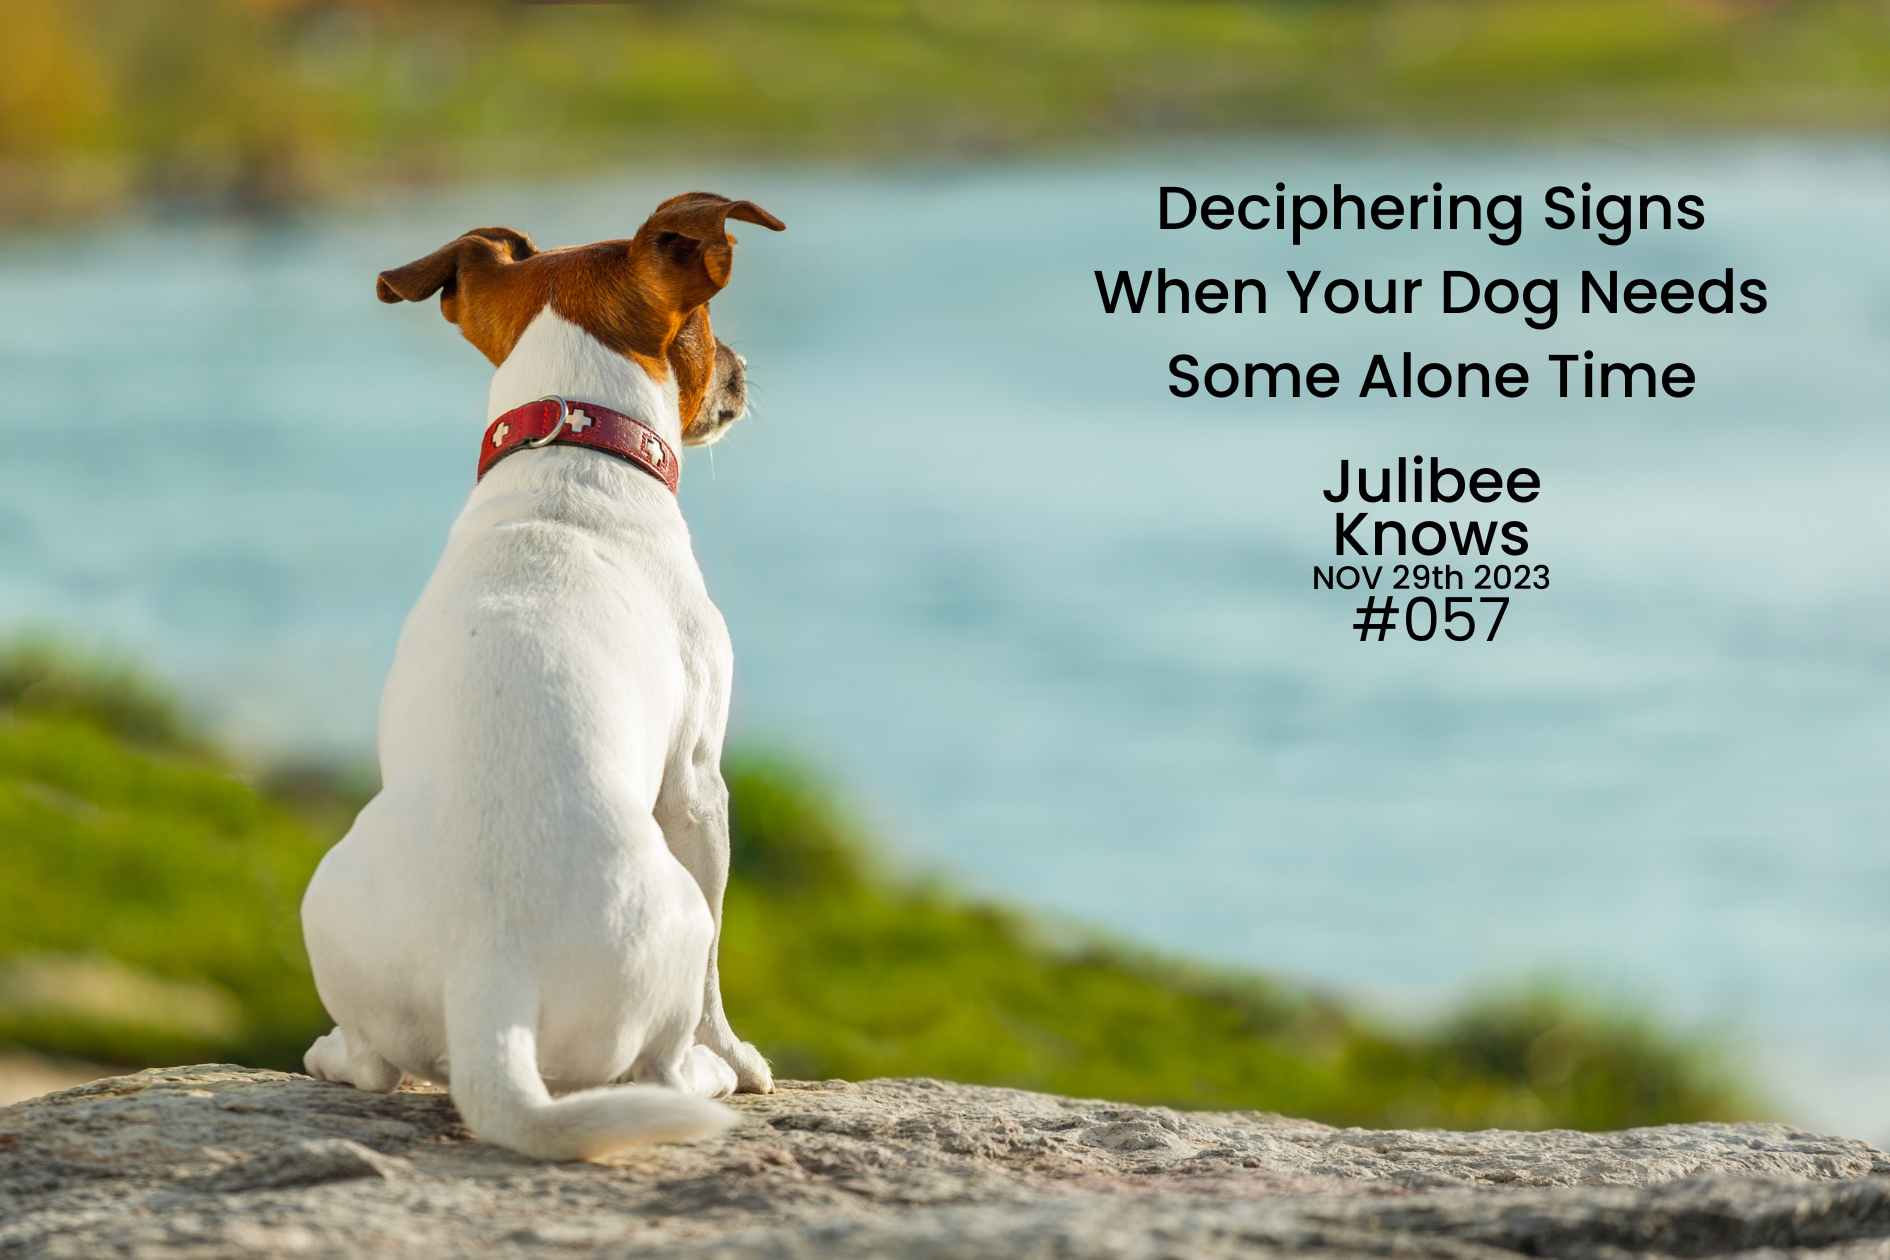 Canine Solitude: Deciphering Signs When Your Dog Needs Some Alone Time